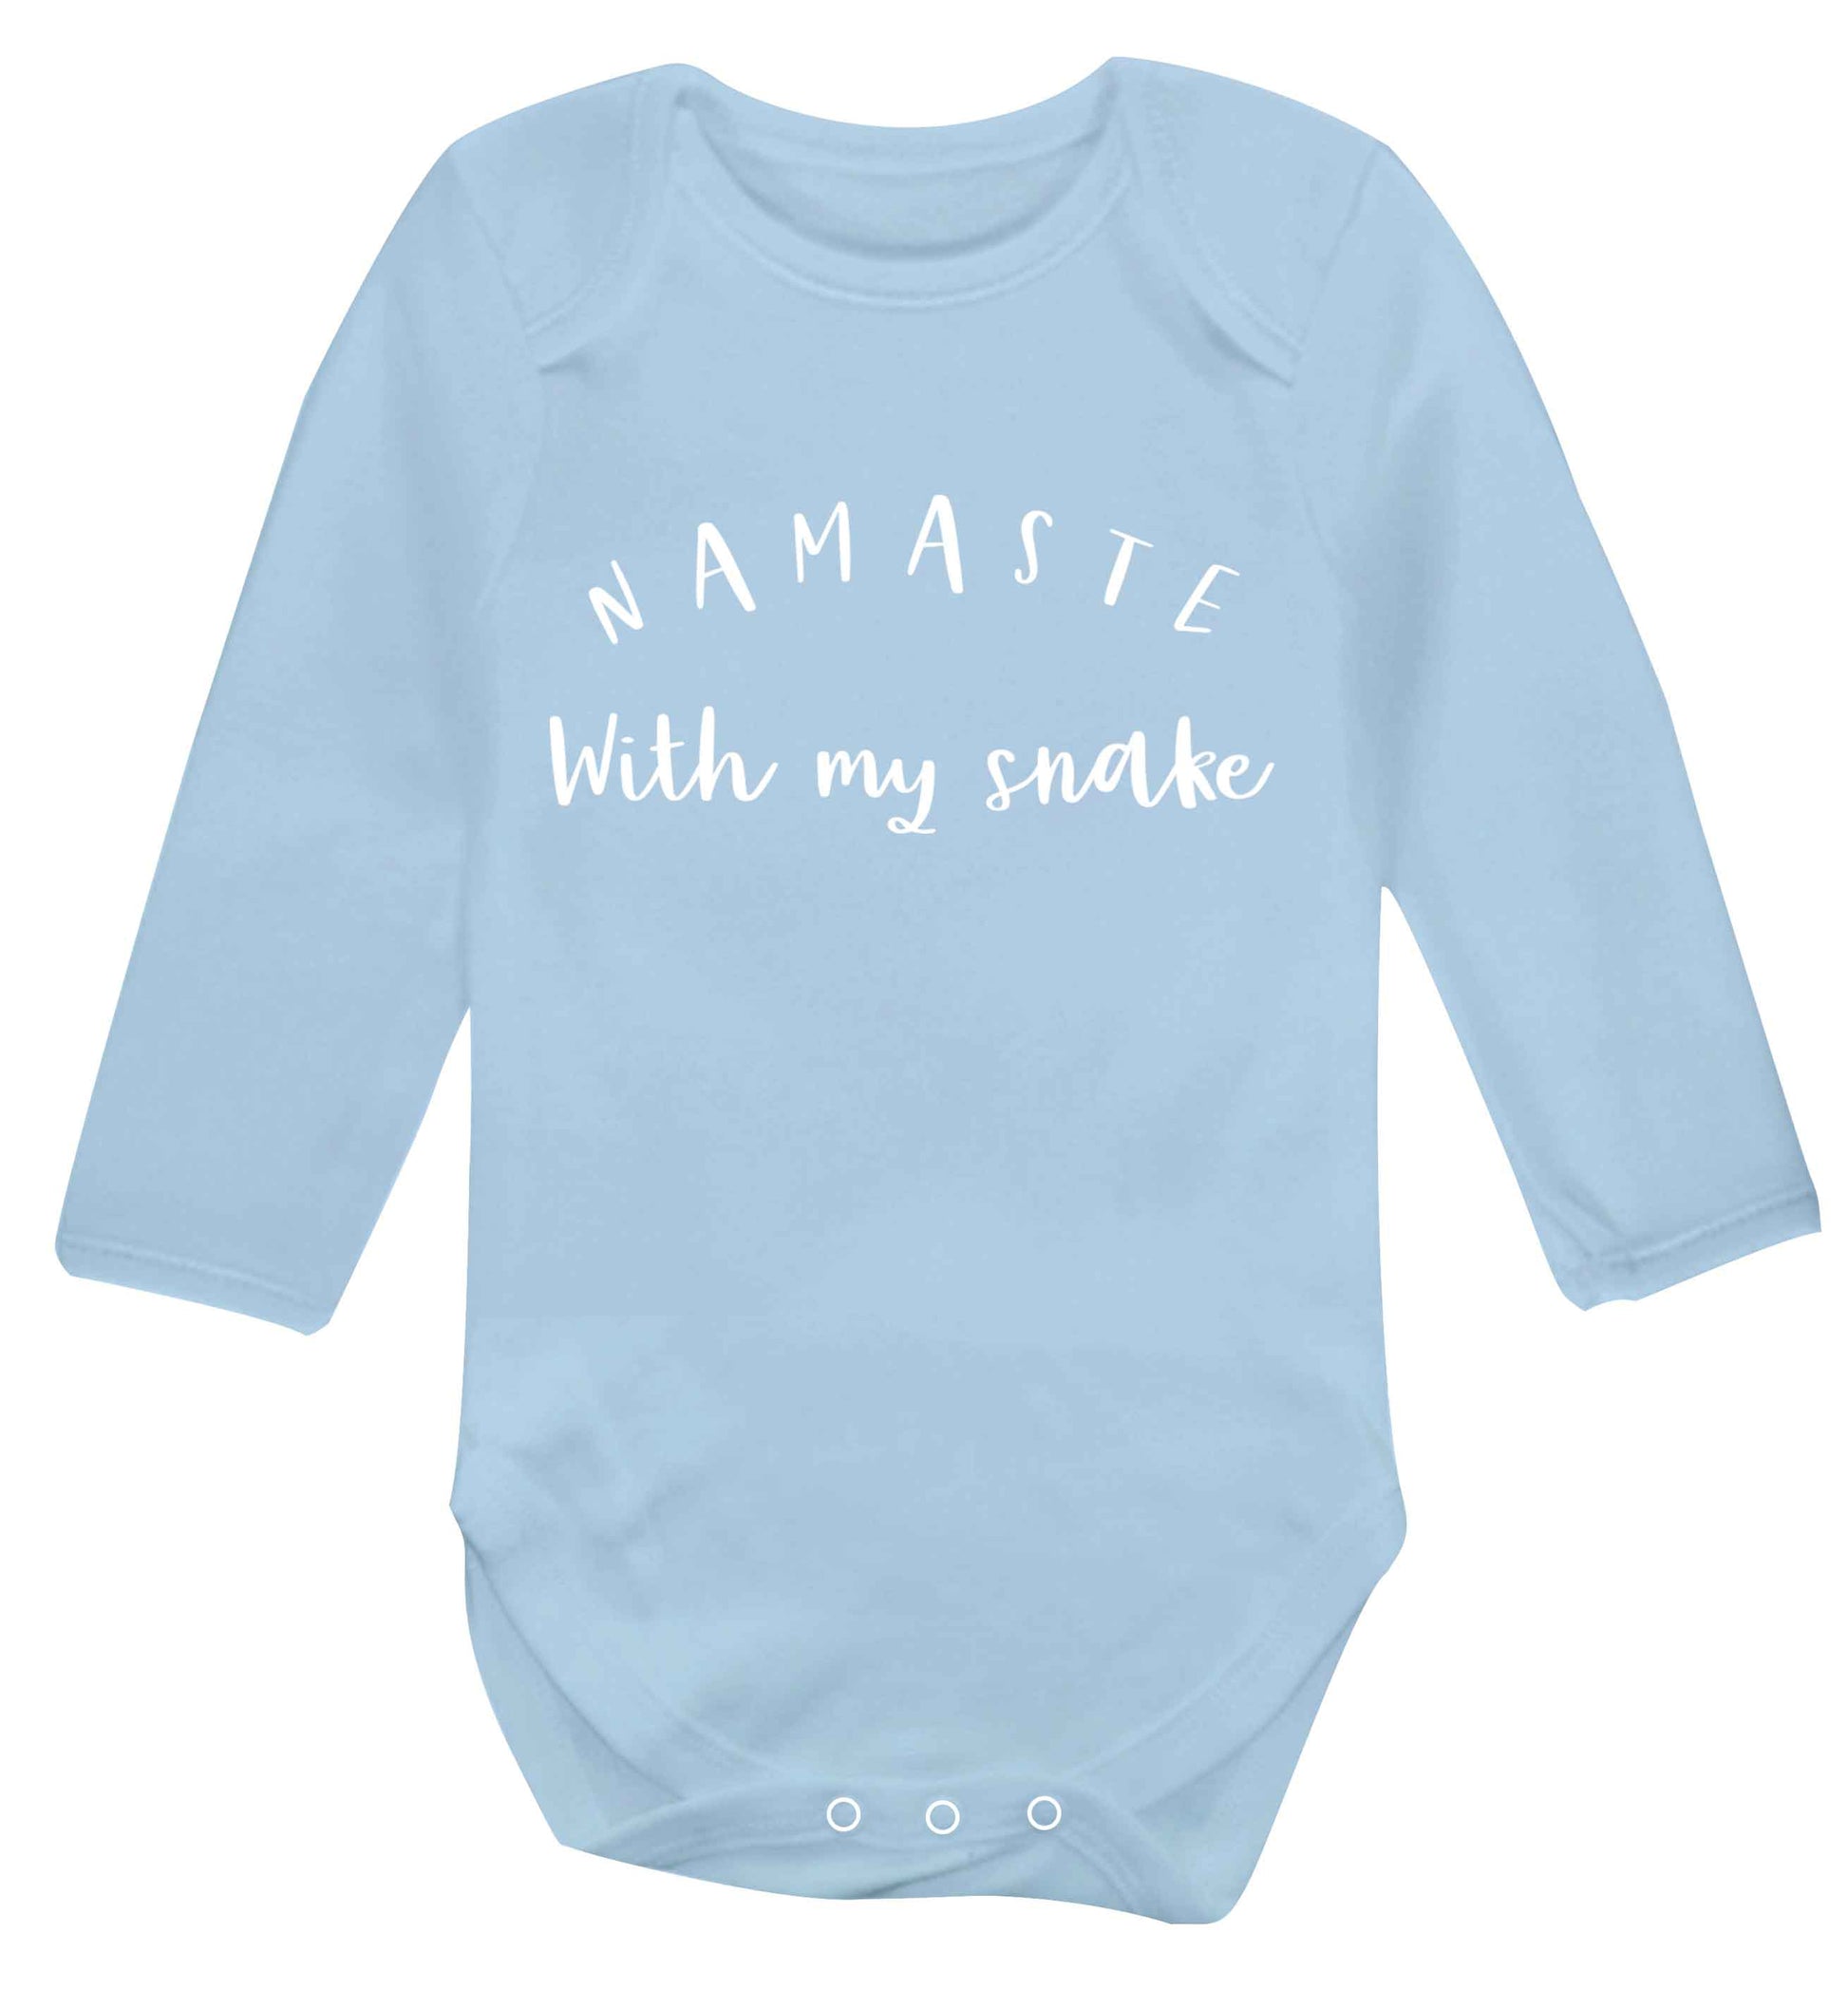 Namaste with my snake Baby Vest long sleeved pale blue 6-12 months